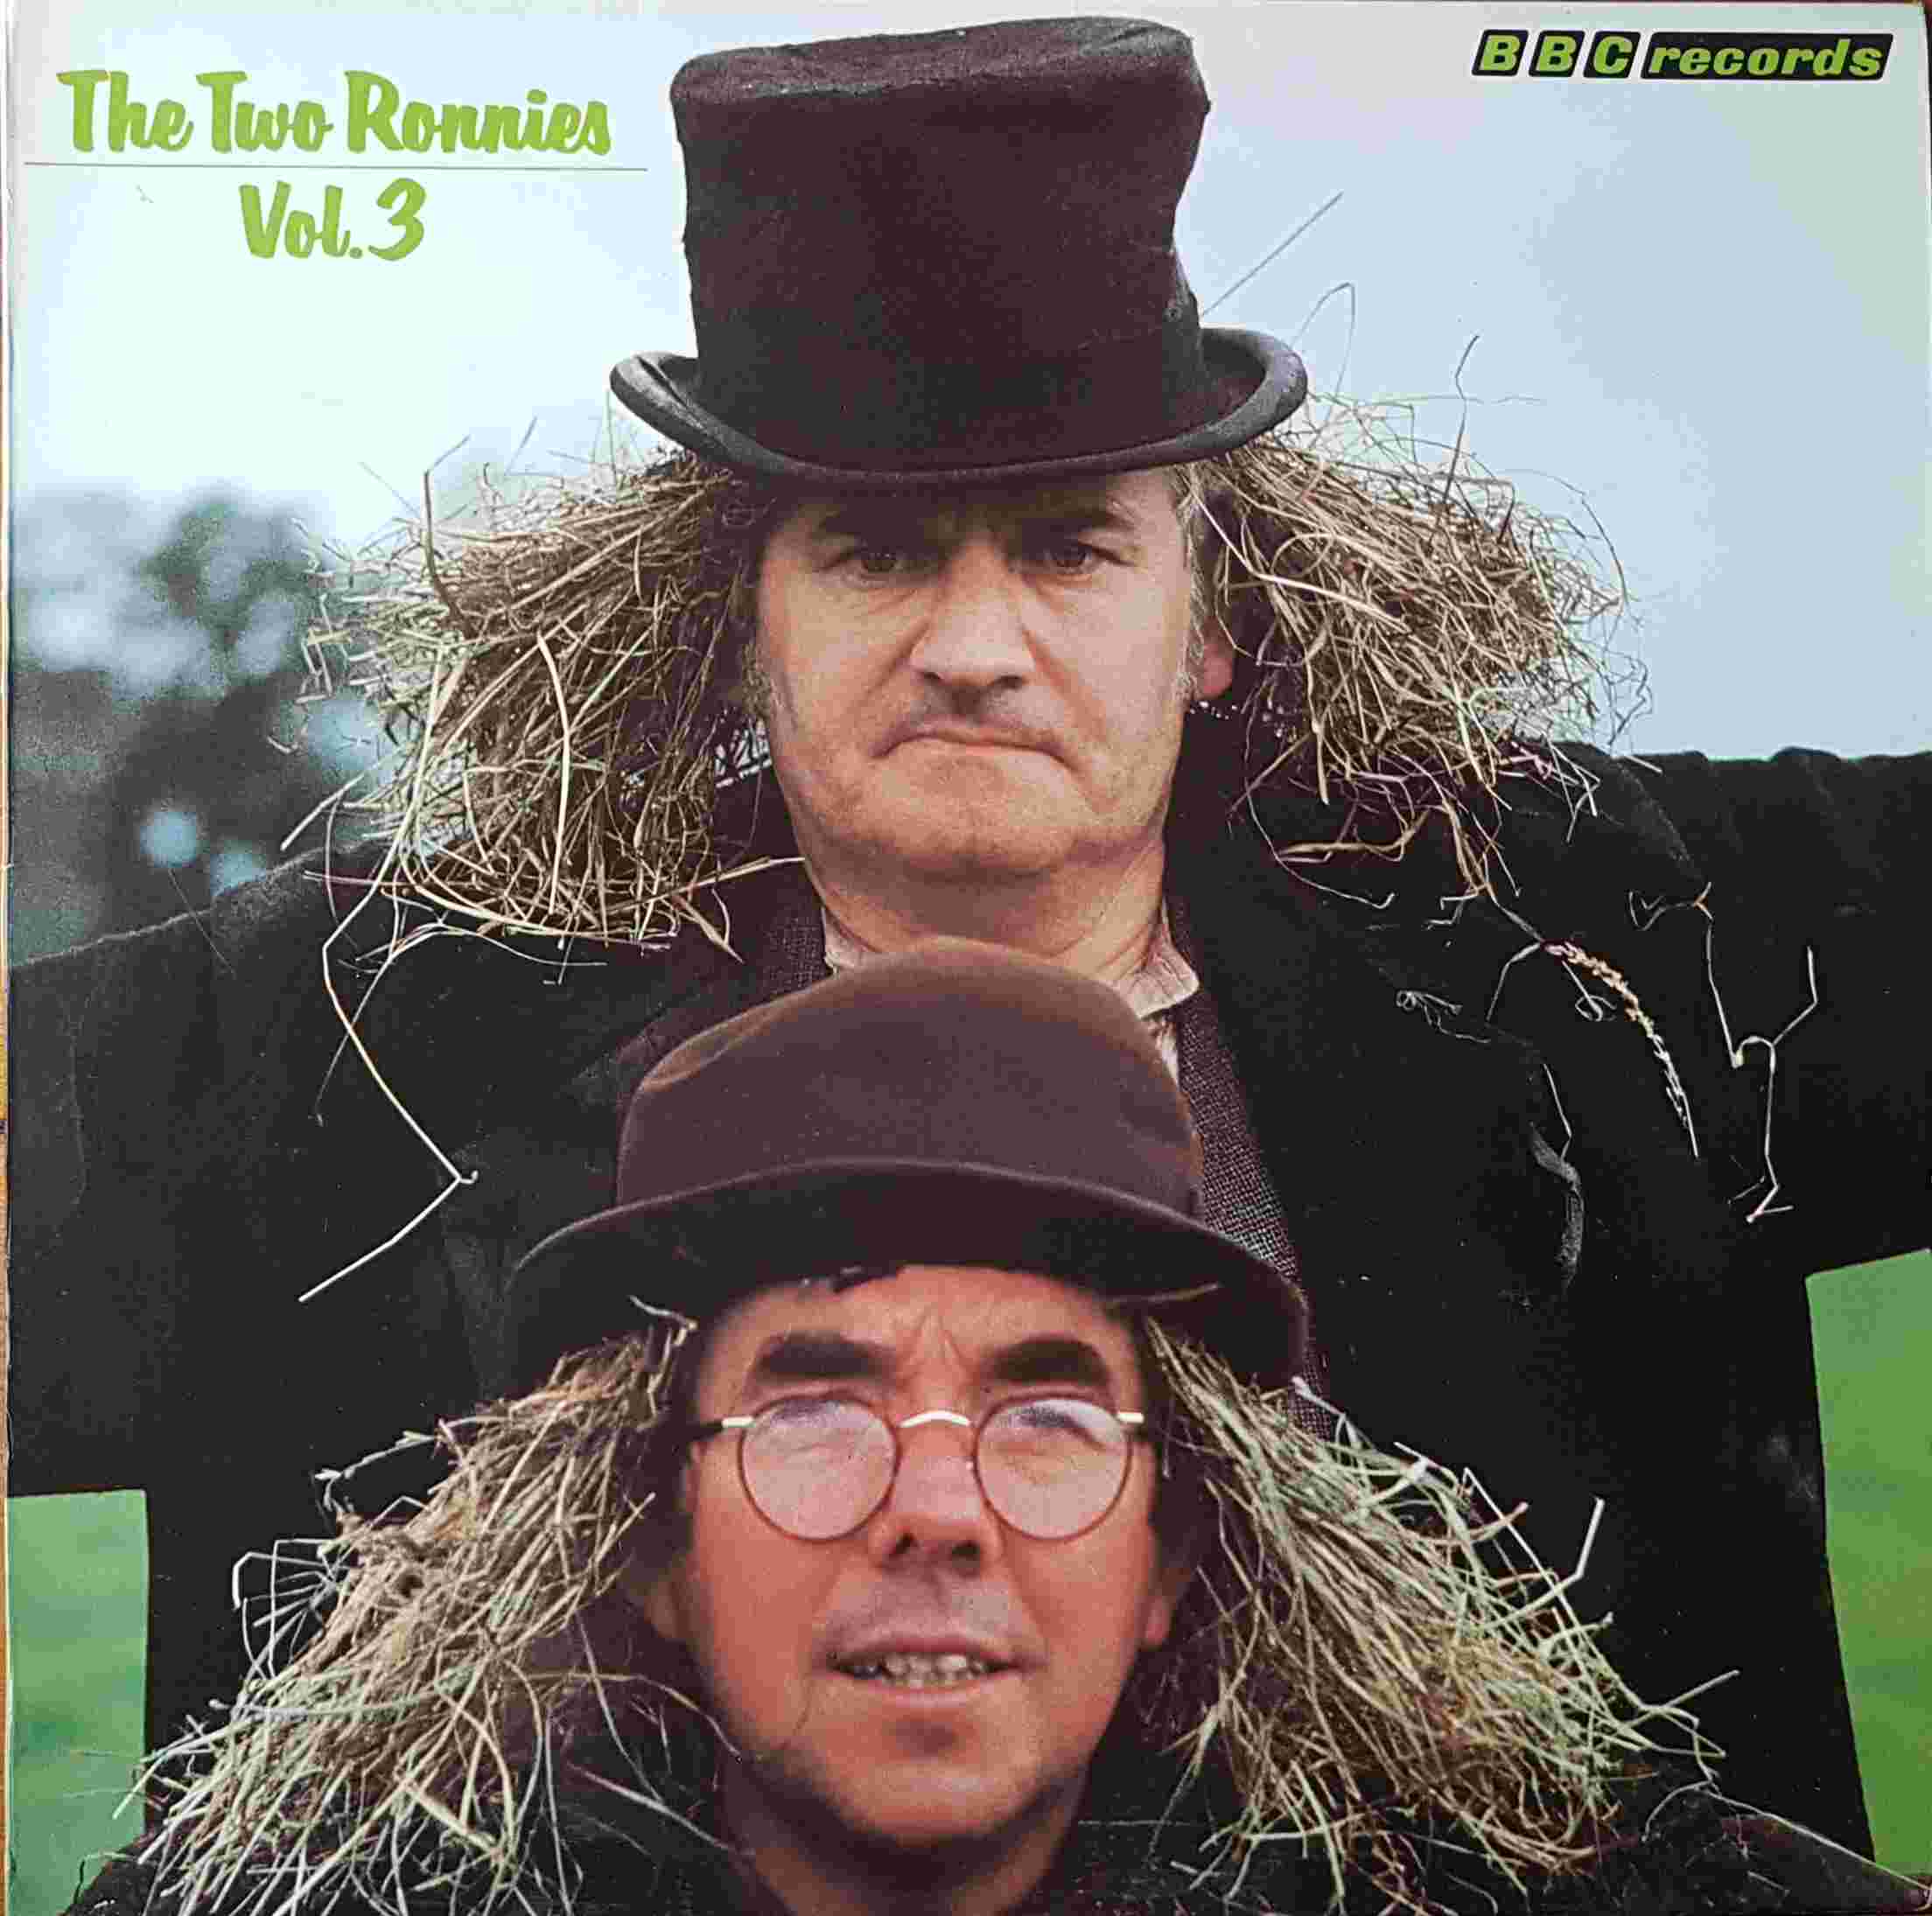 Picture of REB 331 The two Ronnies - Volume 3 by artist Various from the BBC albums - Records and Tapes library